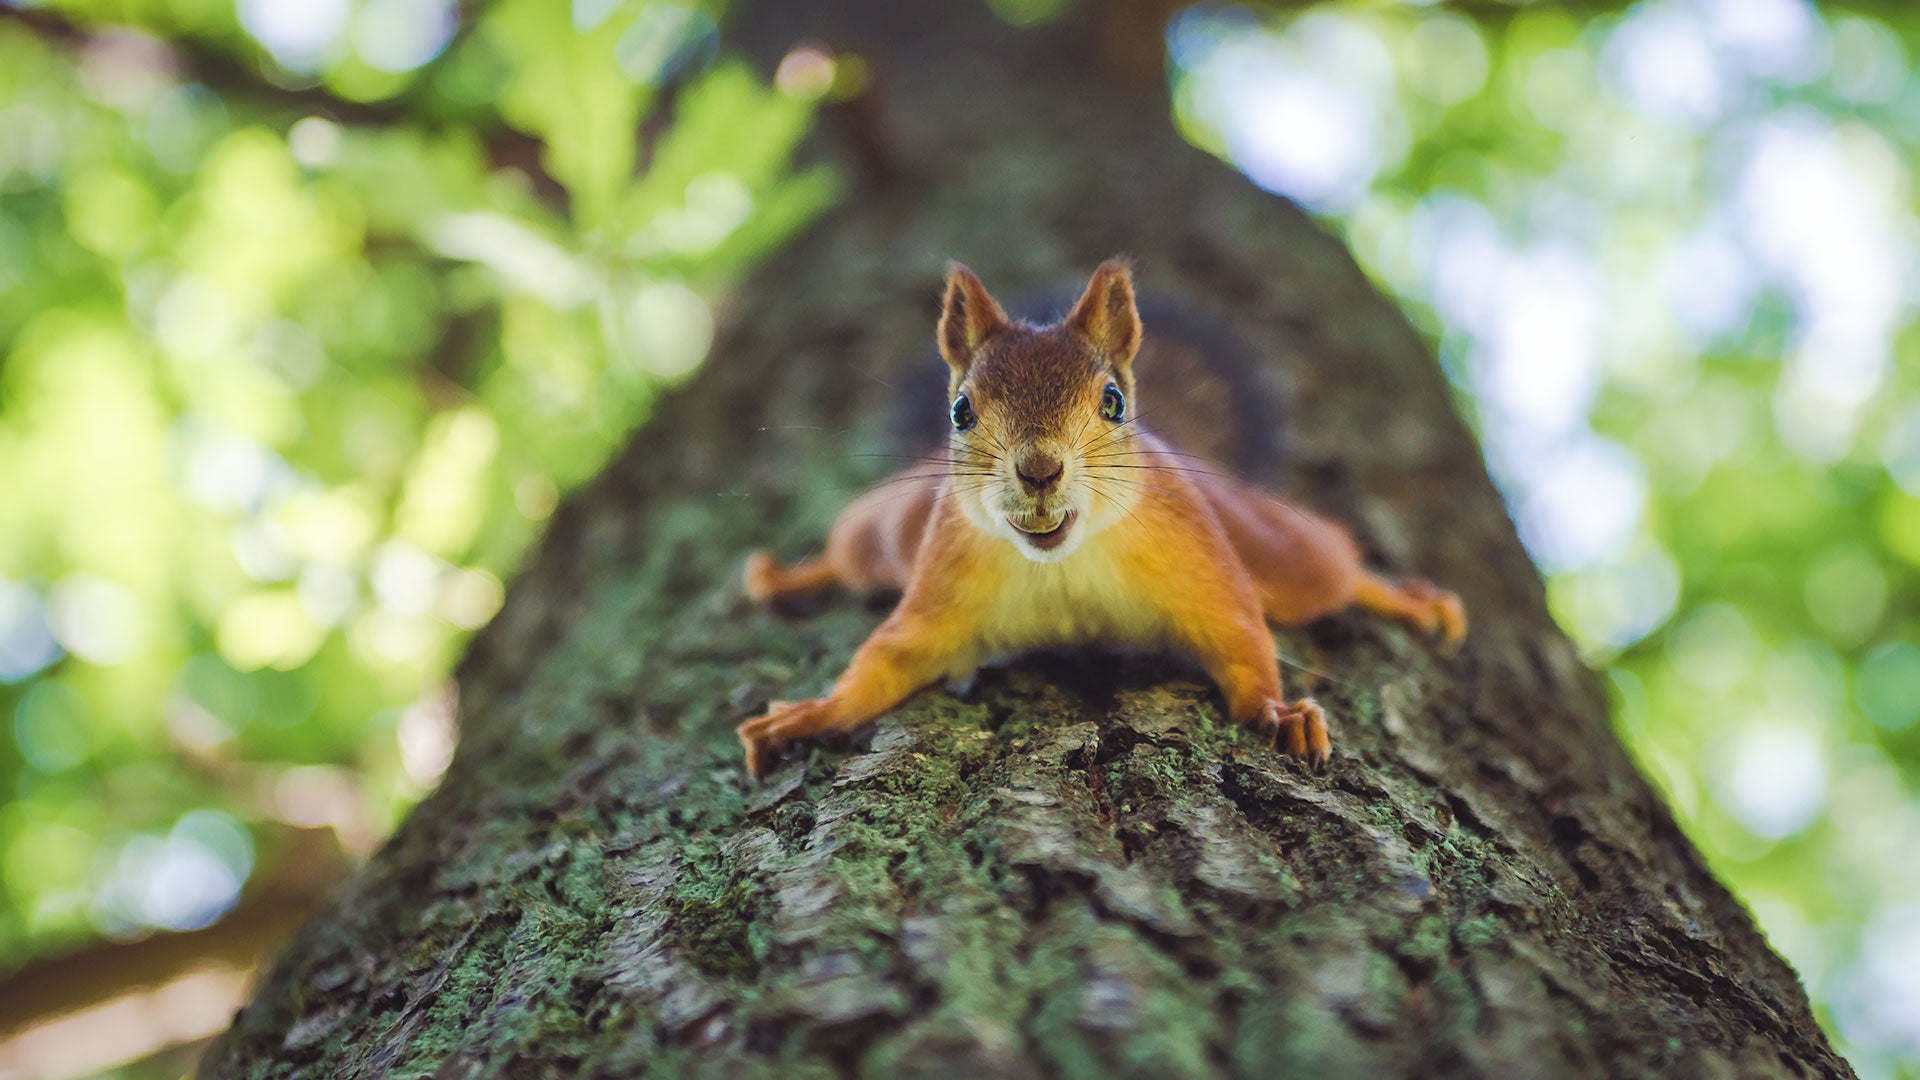 Red squirrel climbing down tree trunk